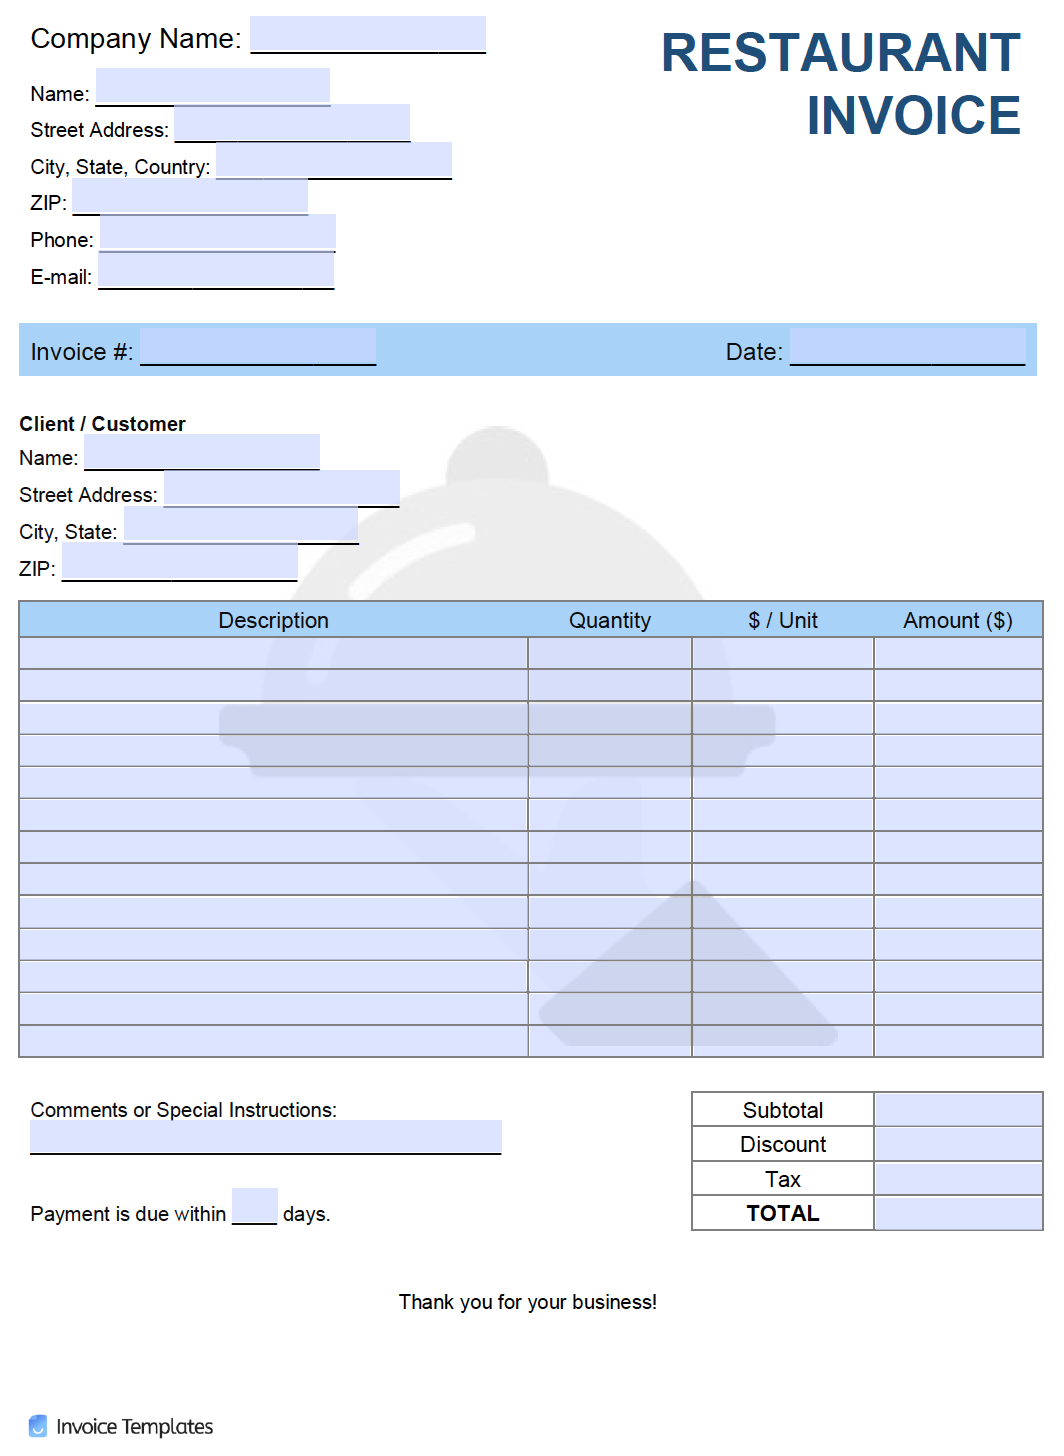 Free Restaurant Invoice Template Pdf Word Excel